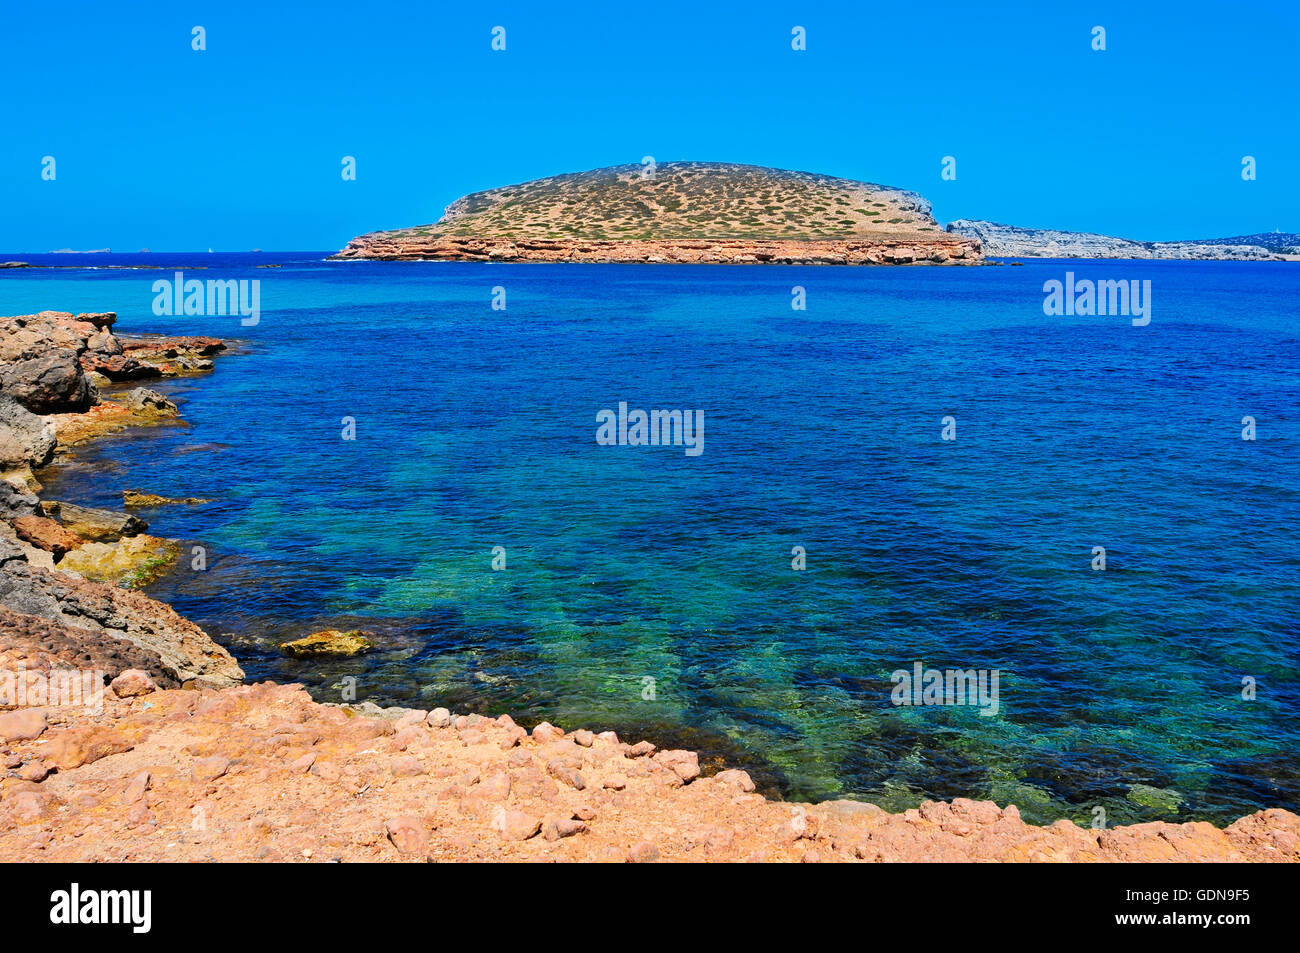 a view of the Southern coast of Sant Antoni de Portmany, in Ibiza Island, Spain, with the Illa des Bosc island in the background Stock Photo